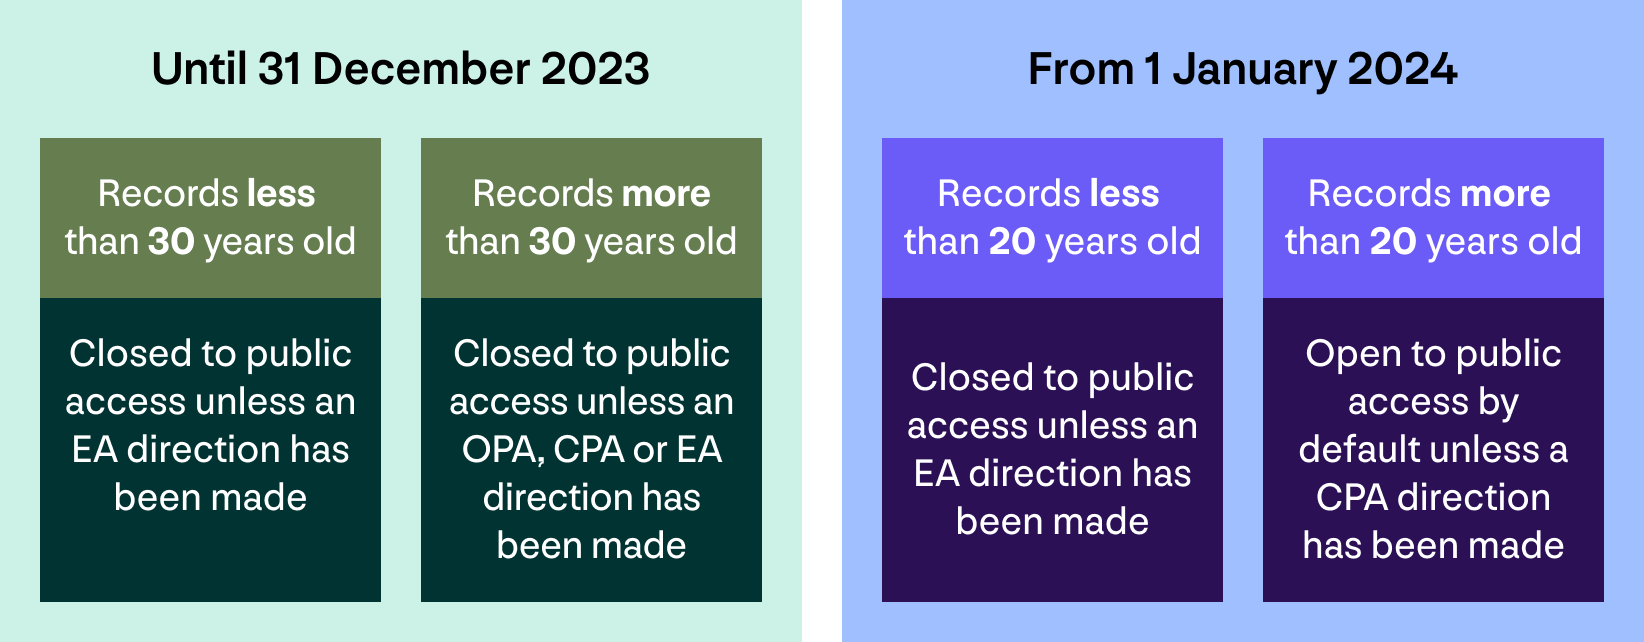 Infographic of changes to OPA and CPA directions